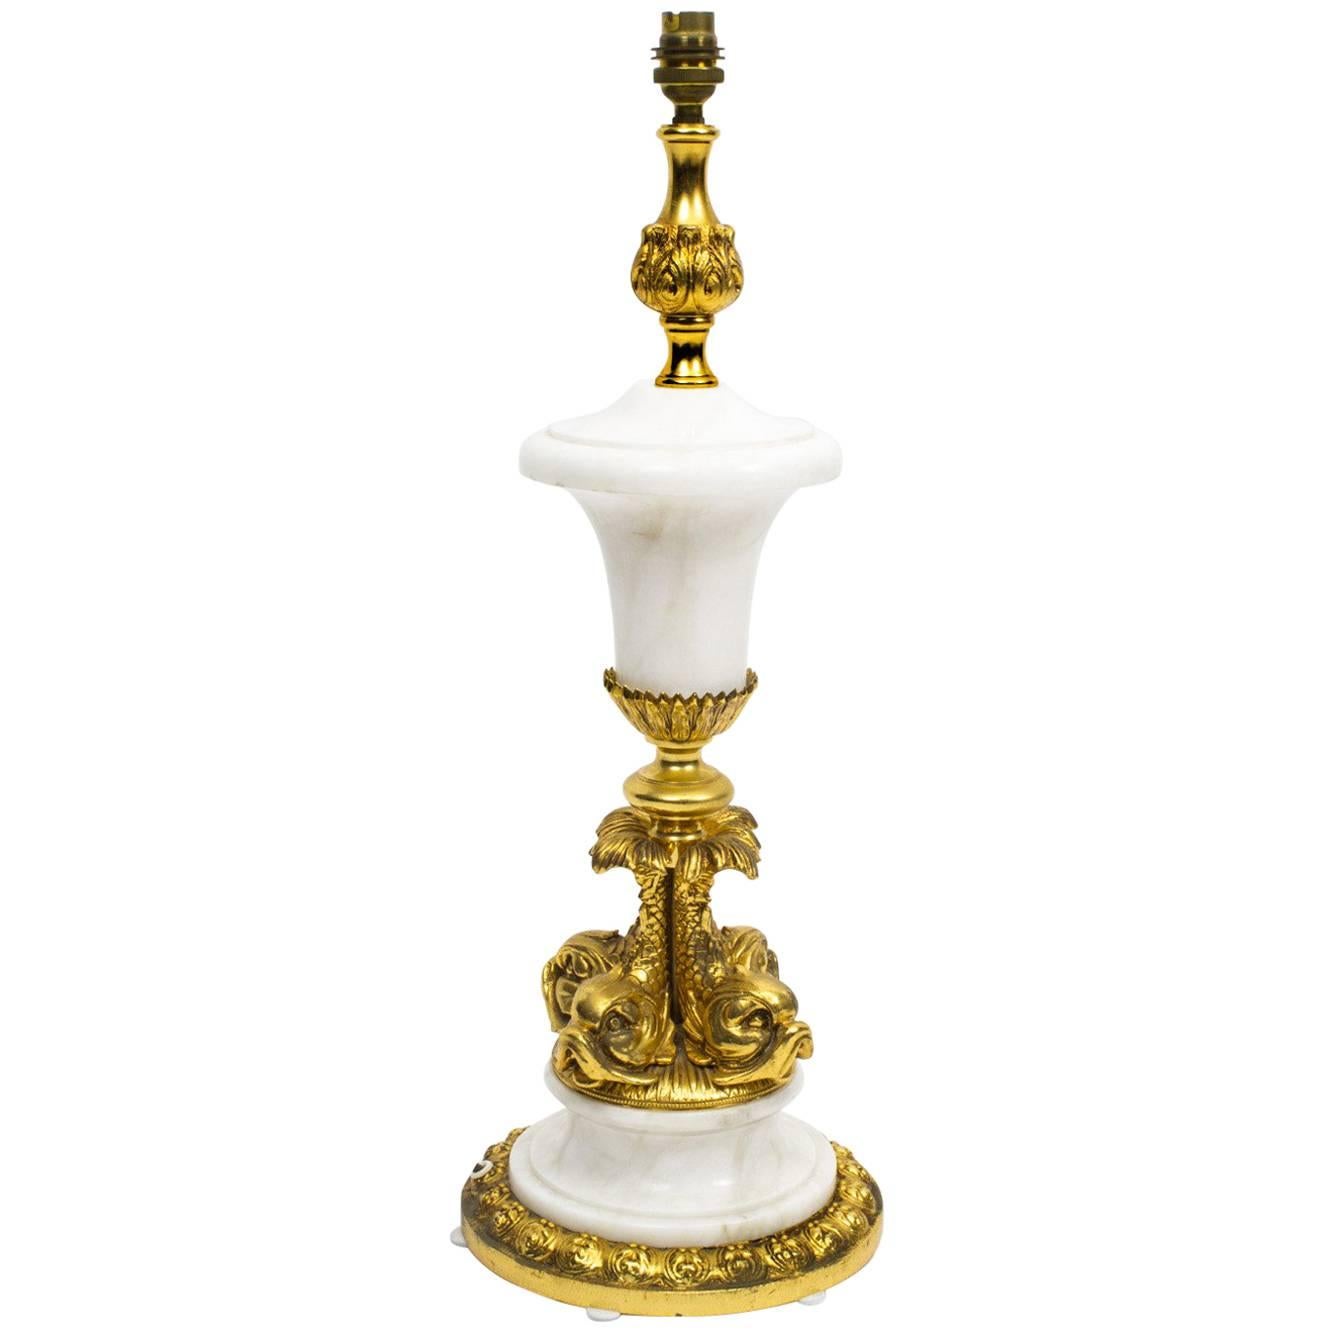 Vintage Ormolu and Marble Dolphin Table Lamp Louis Revival